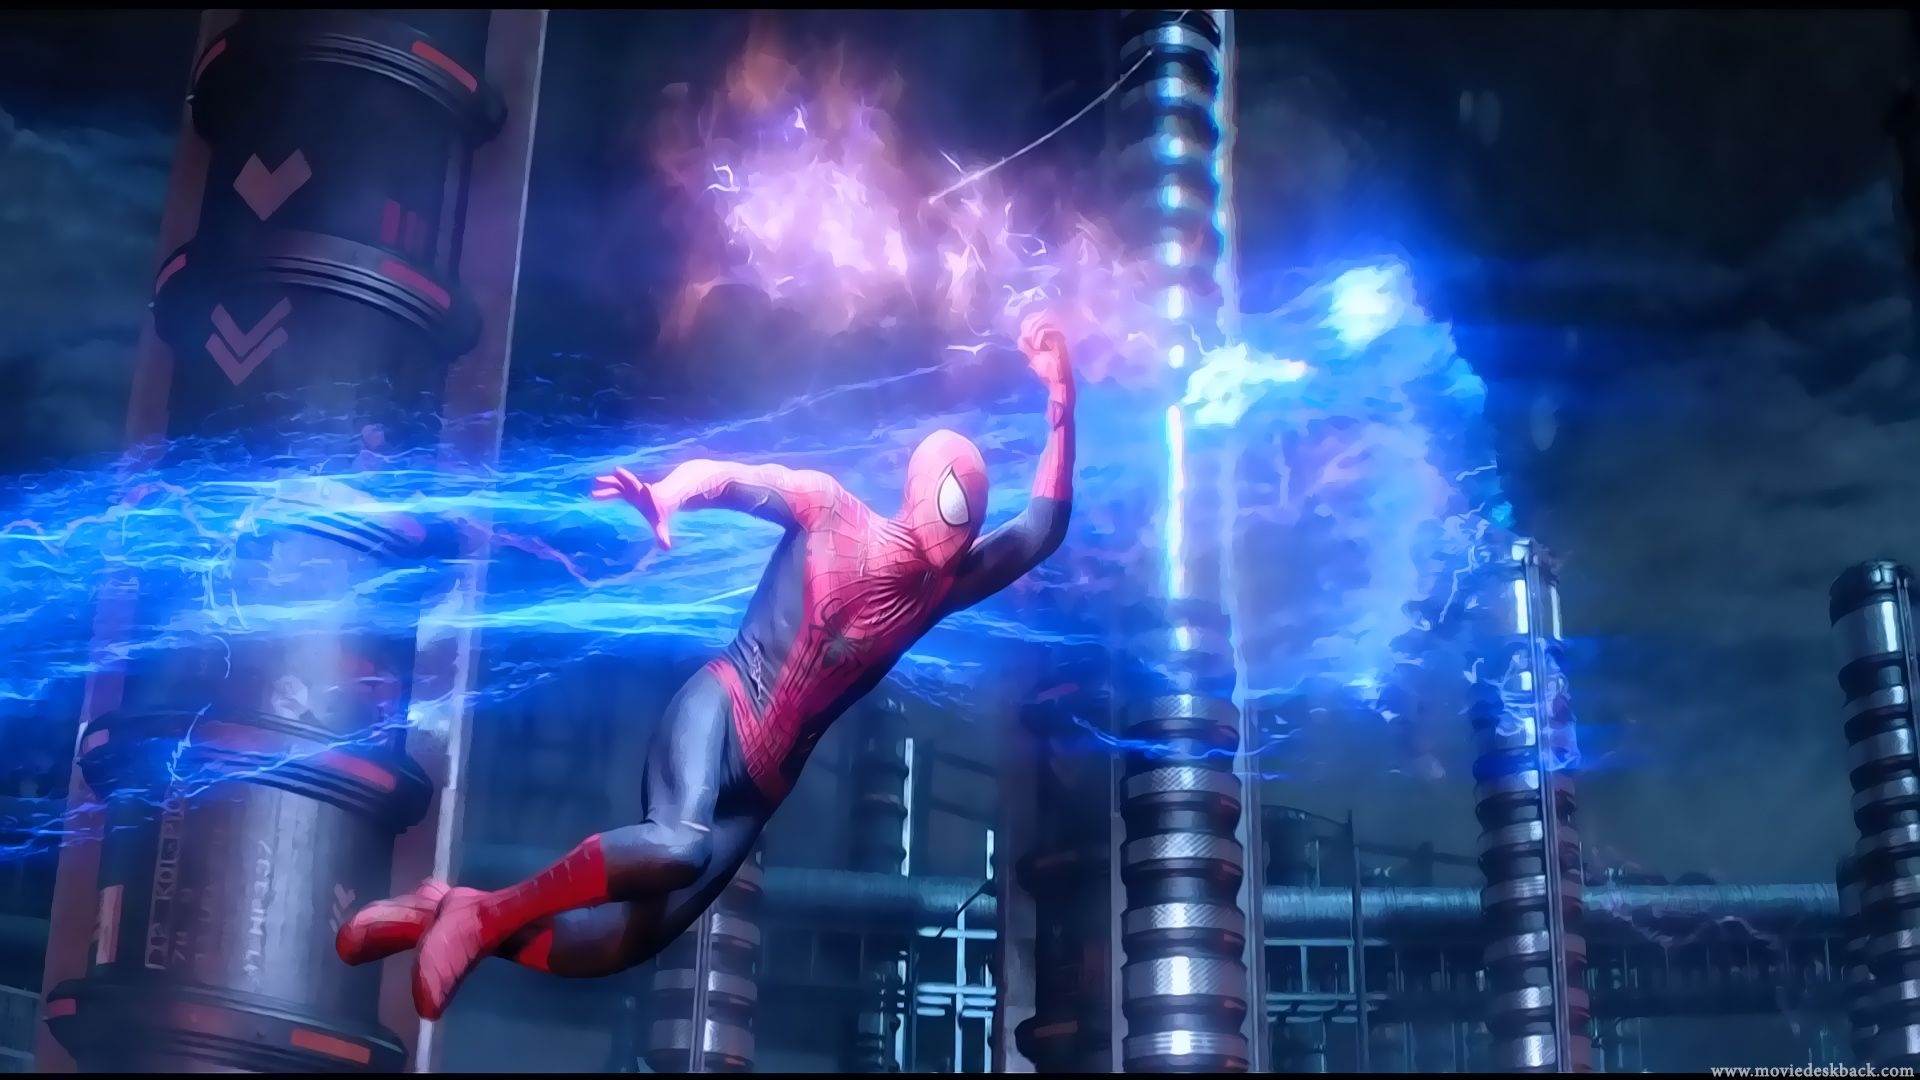 Free Download 15 Wallpaper Of The Amazing Spider Man 2 Movie Wallpaper [1920x1080] For Your Desktop, Mobile & Tablet. Explore Amazing Spider Man Wallpaper. HD Wallpaper Of Spider Man, Spider